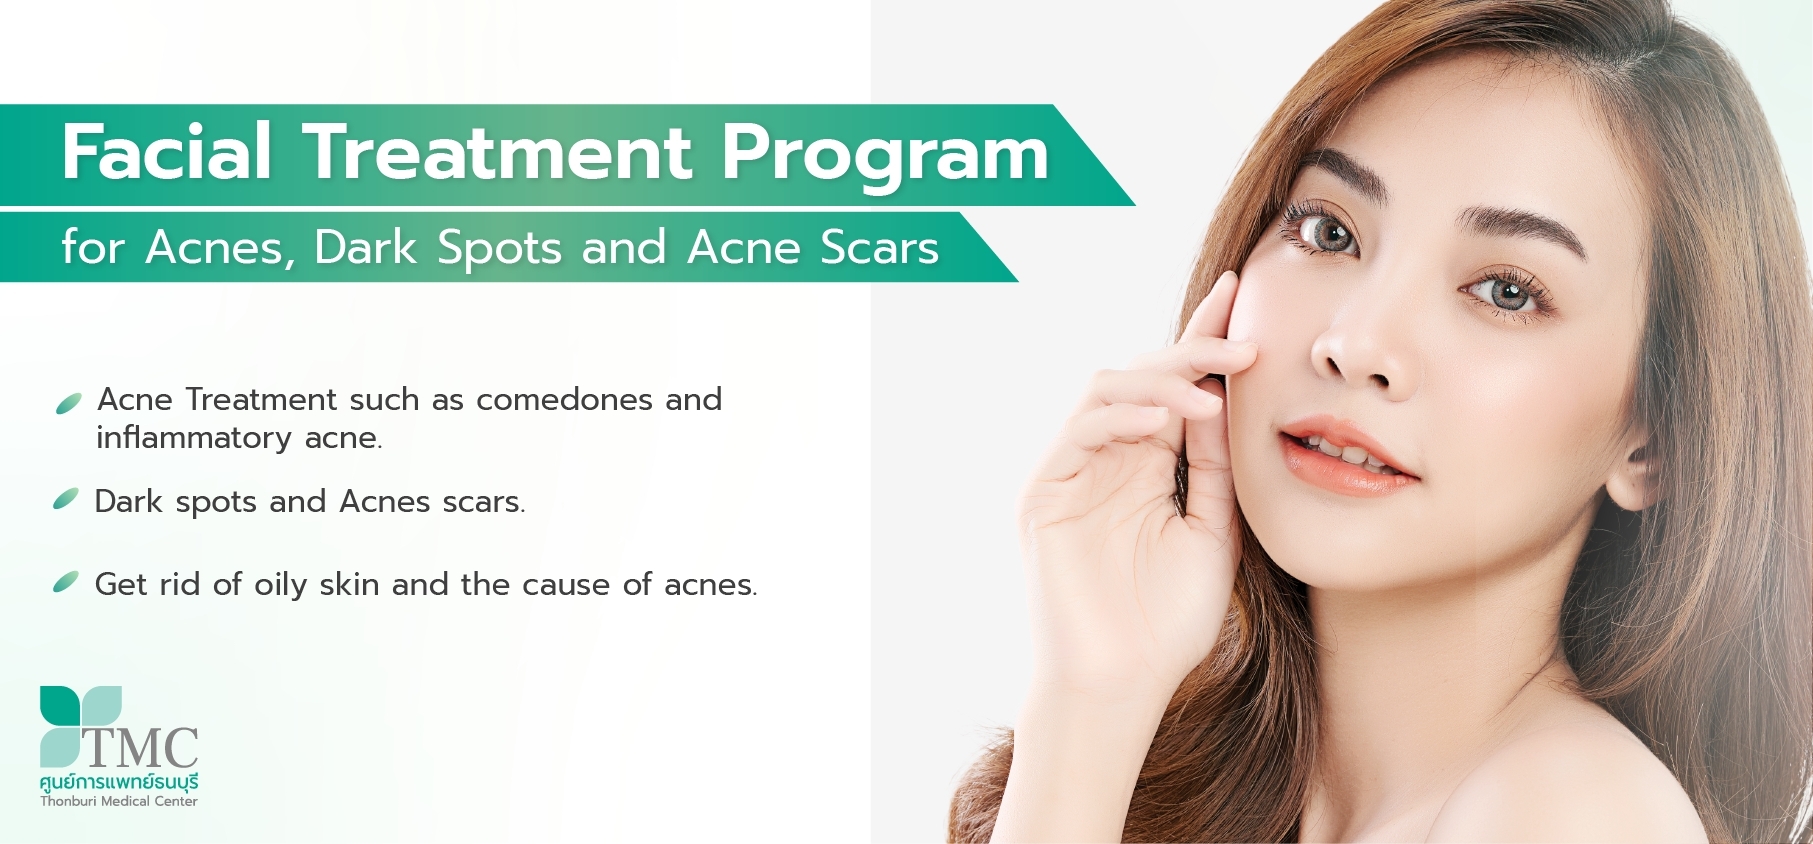 Acnes and Scars Treatment Program